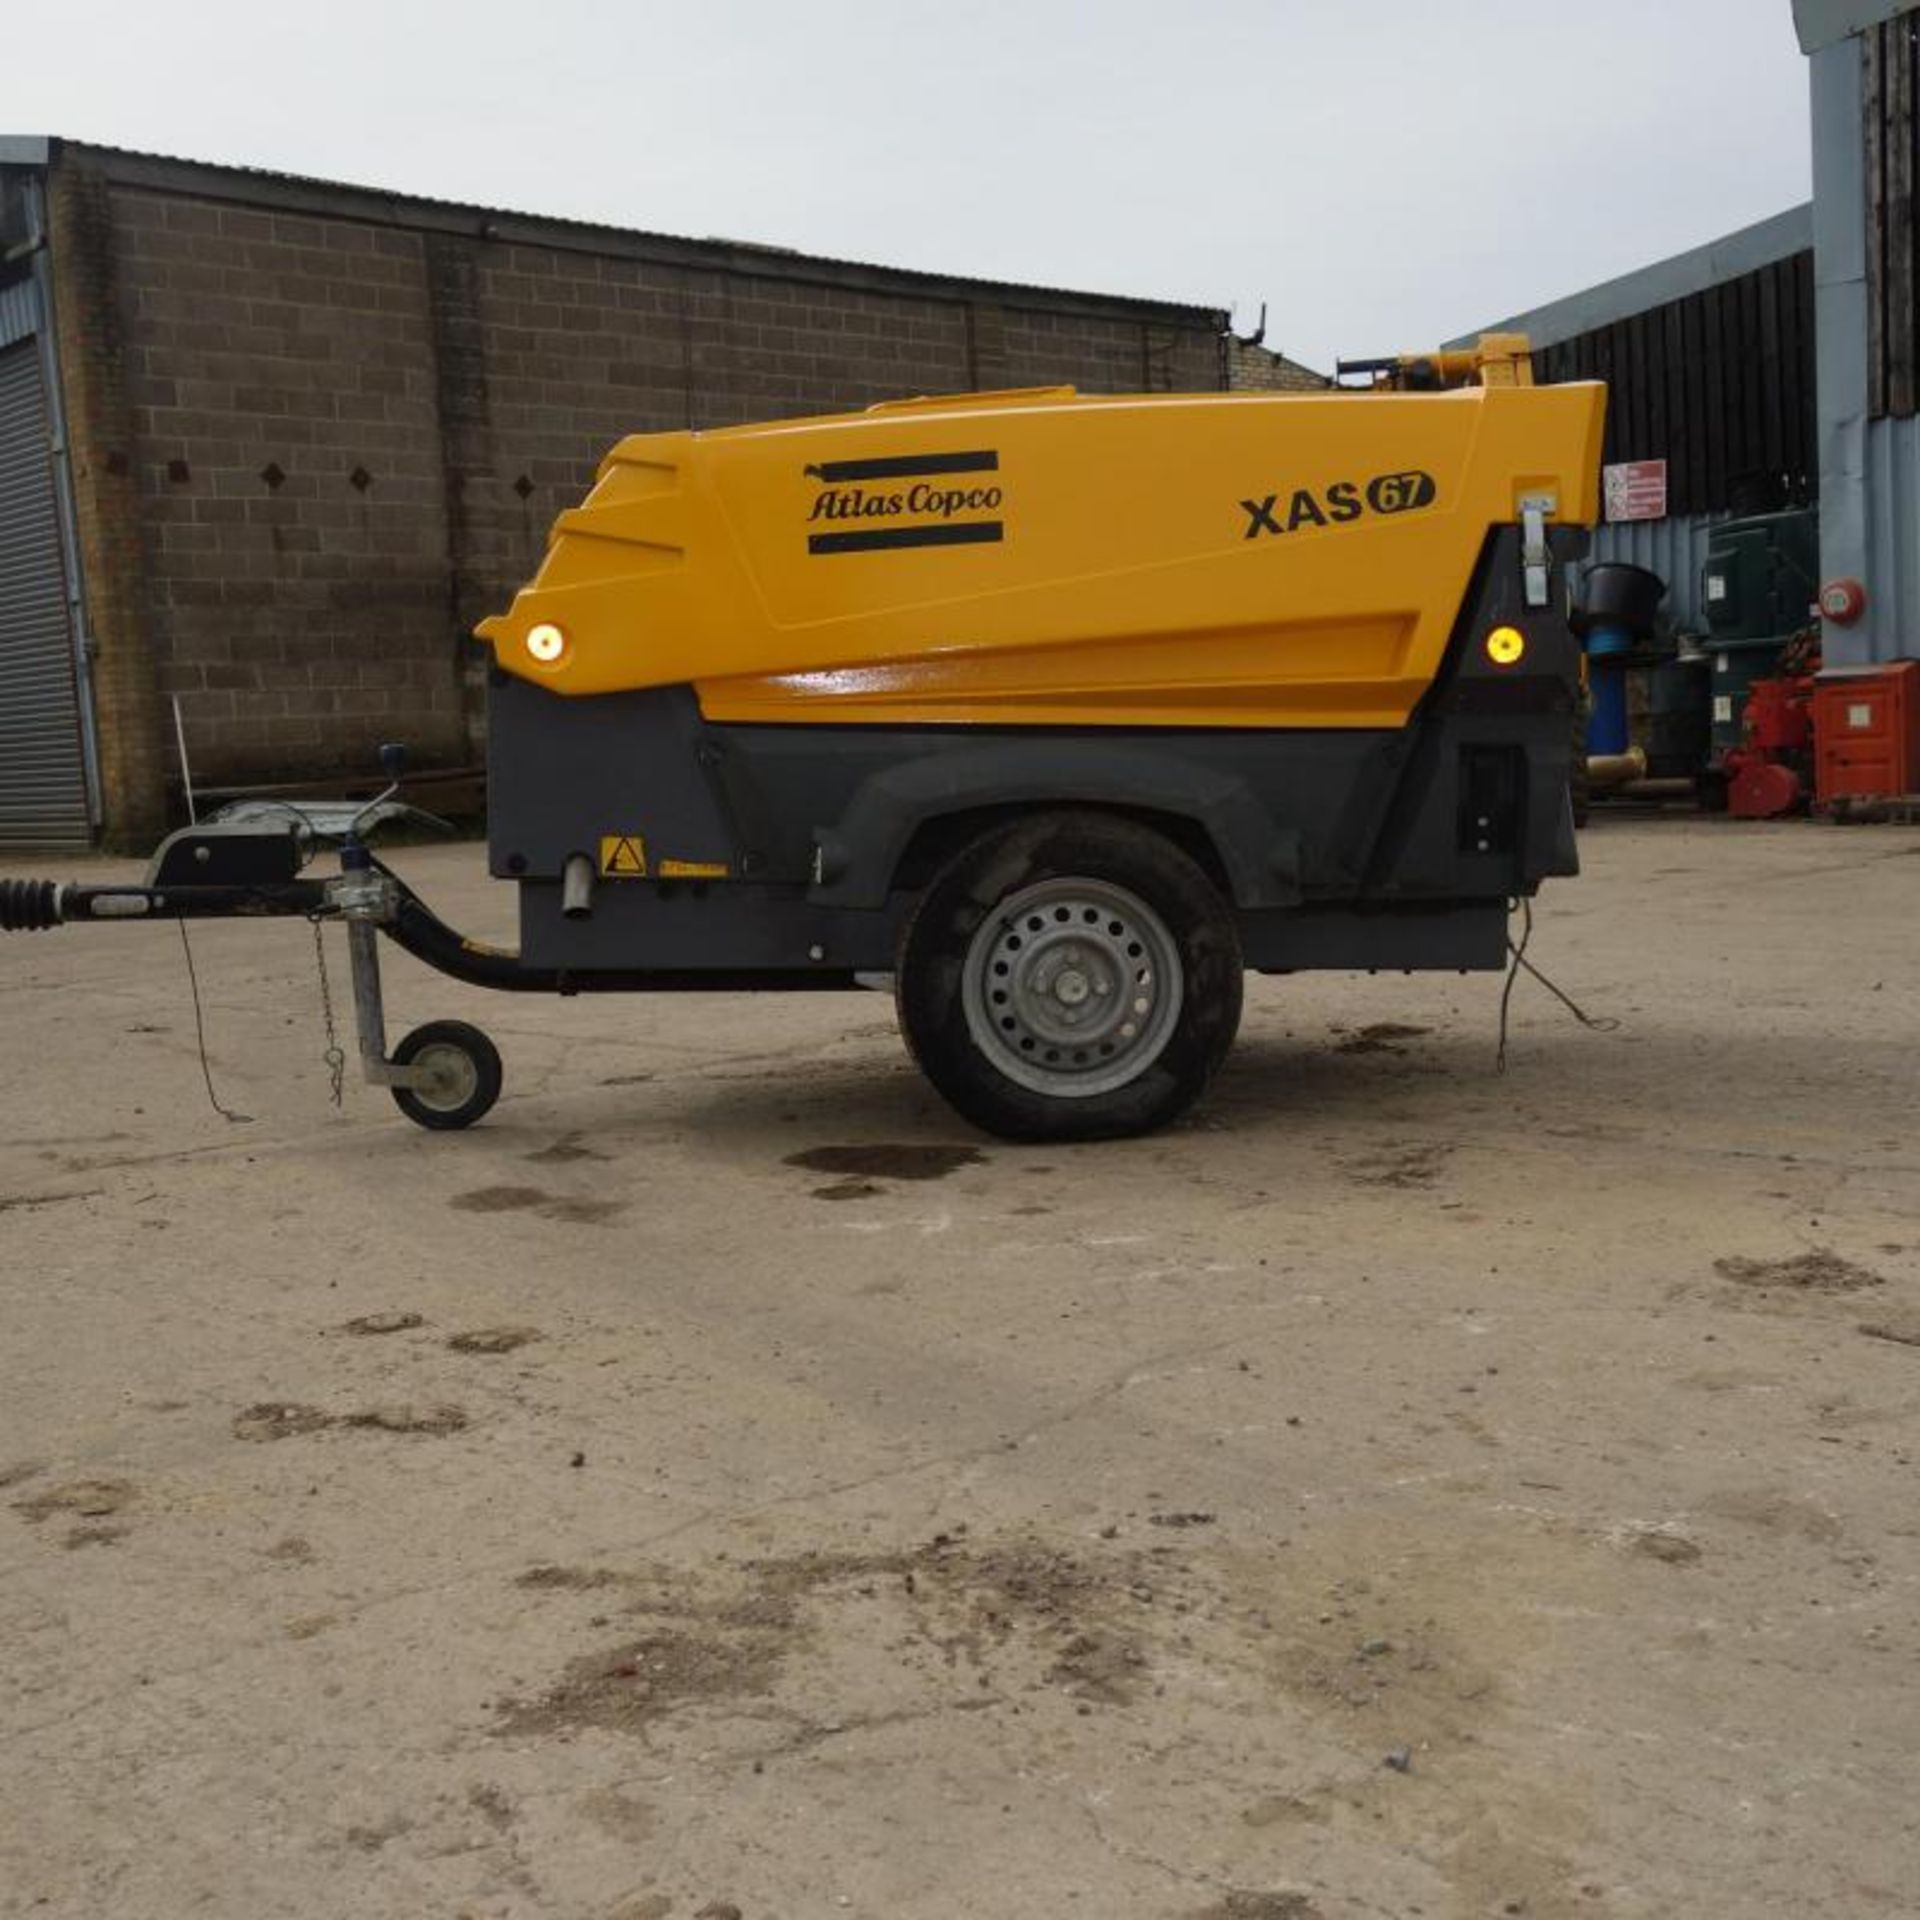 2015 Atlas Copco Xas 67 Compressor, 936 Hours From New - Image 2 of 6